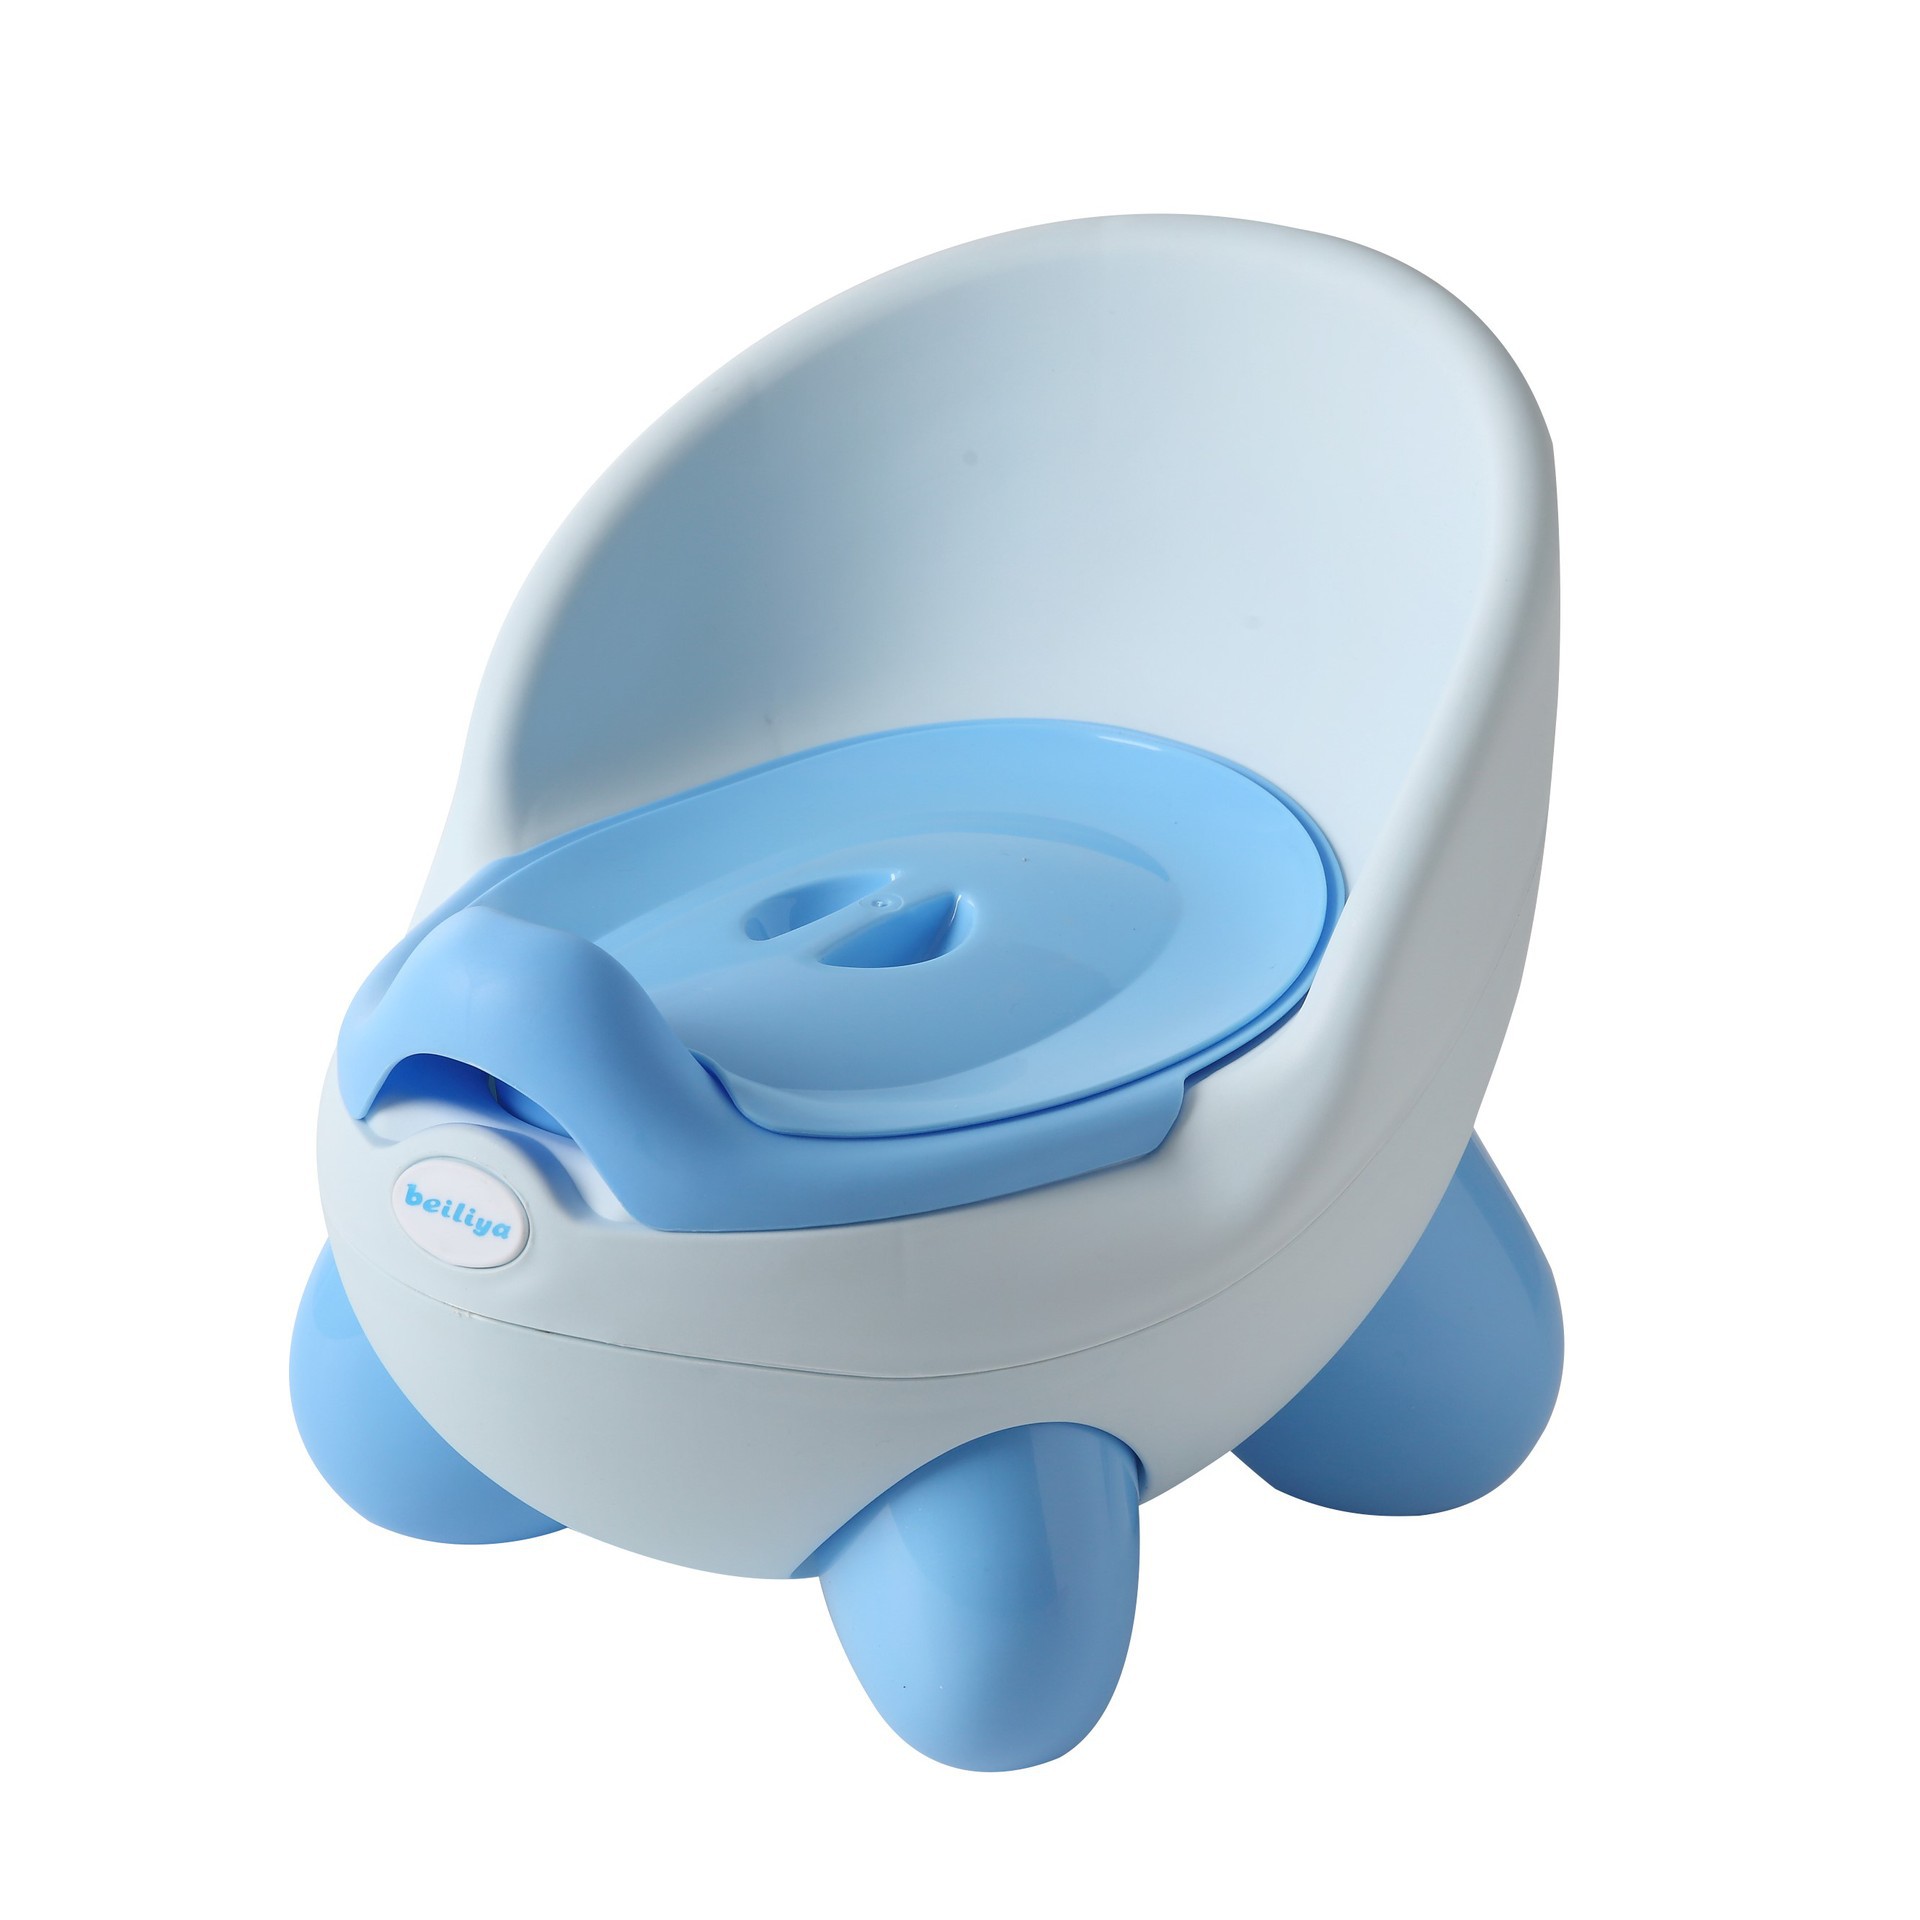 Egg Children's Small Toilet Seat Toilet Toddler and Baby Children's Toilet Urine Bedpan Stool Portable Vehicle-Mounted Men and Women